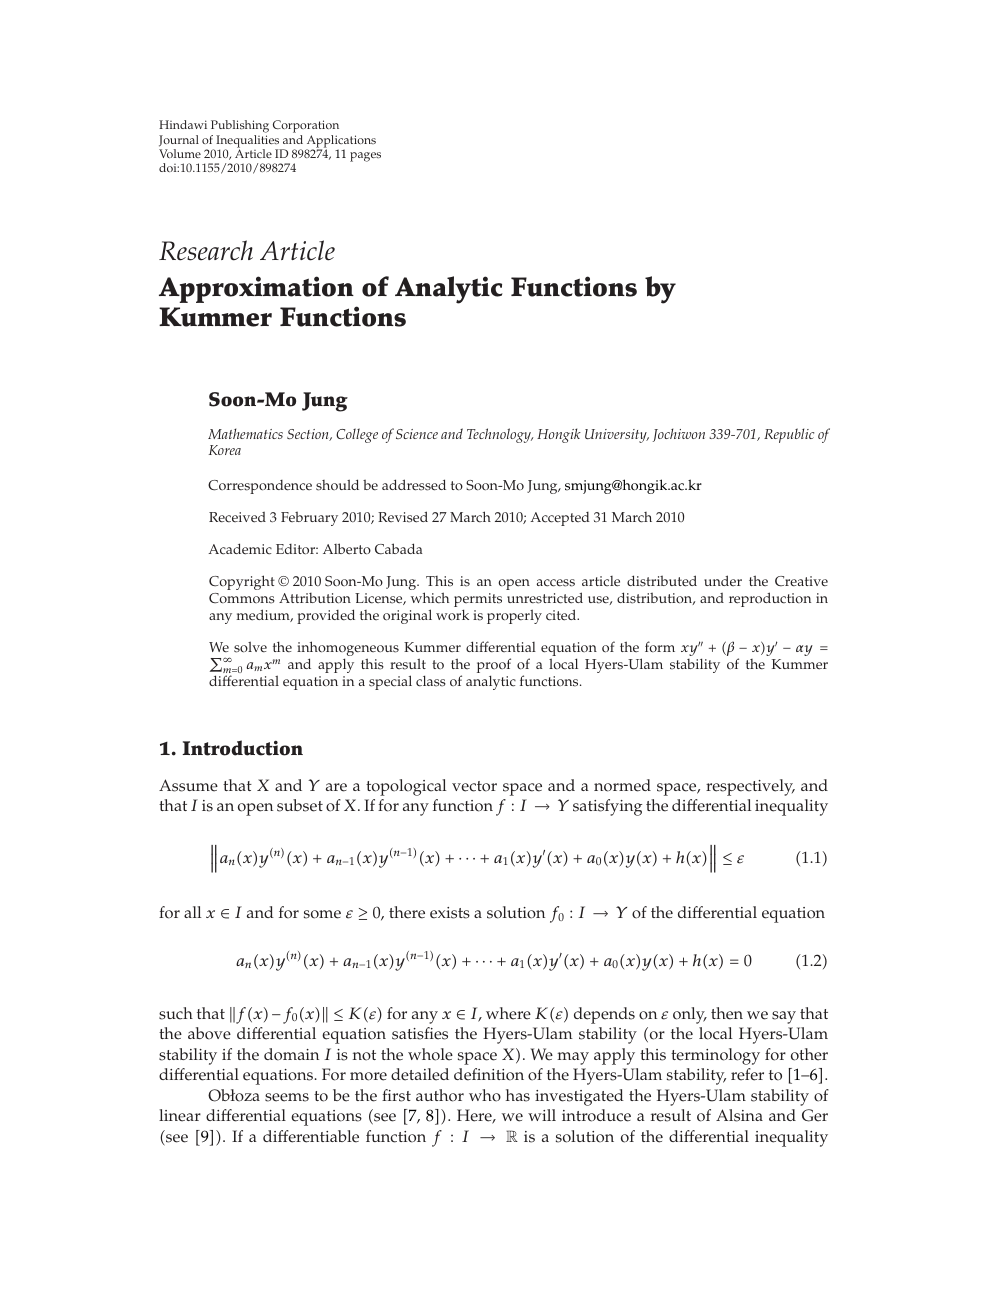 Approximation Of Analytic Functions By Kummer Functions Topic Of Research Paper In Mathematics Download Scholarly Article Pdf And Read For Free On Cyberleninka Open Science Hub